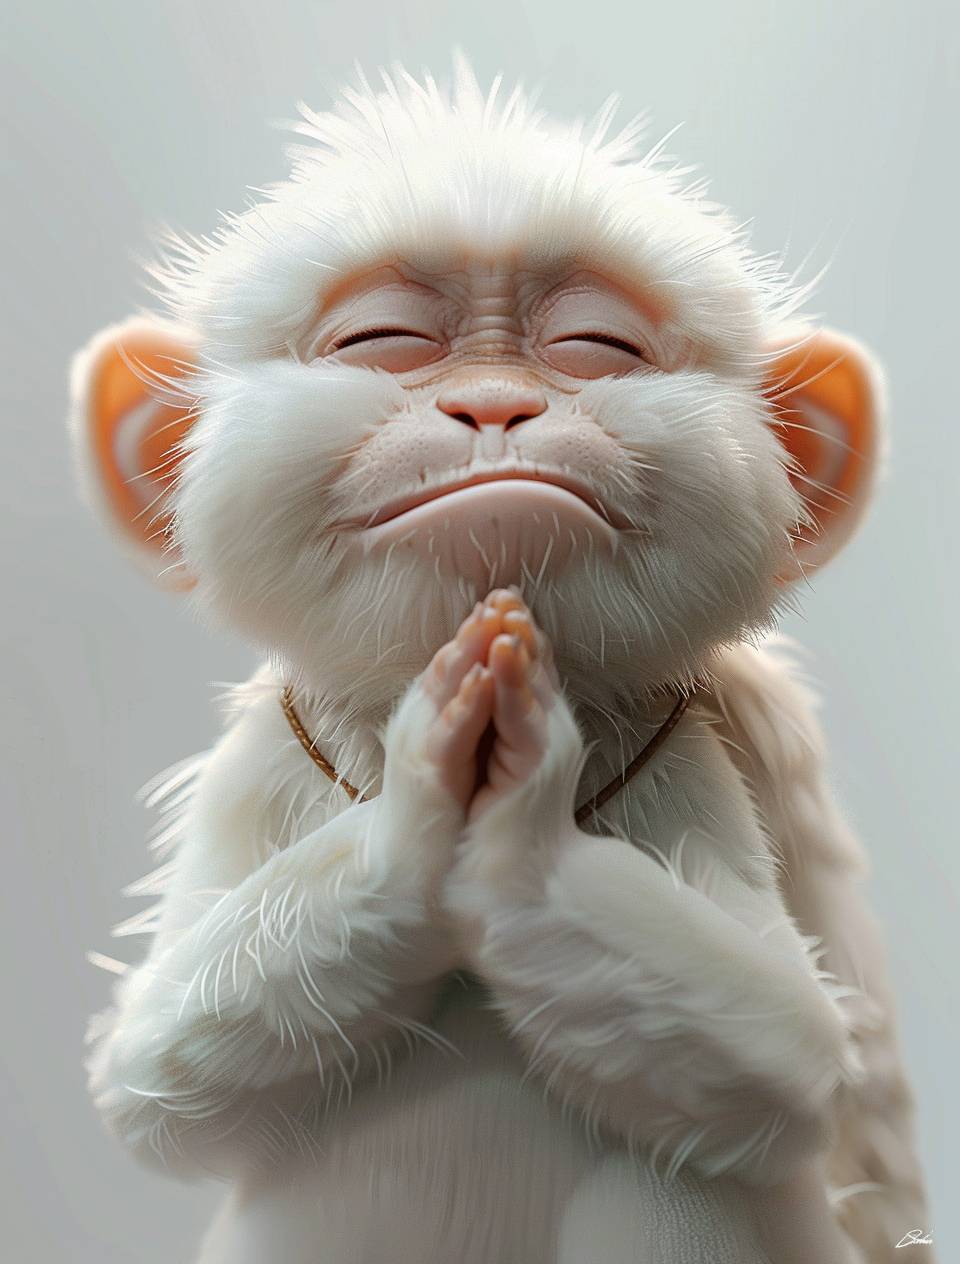 A cute white monkey with a chubby body and smiling expression, eyes closed and hands clasped together in prayer on its chest. A pure style background with a white clean wall. White fur all over its body, white ears, and a white tail. Anime style and Pixar art style.